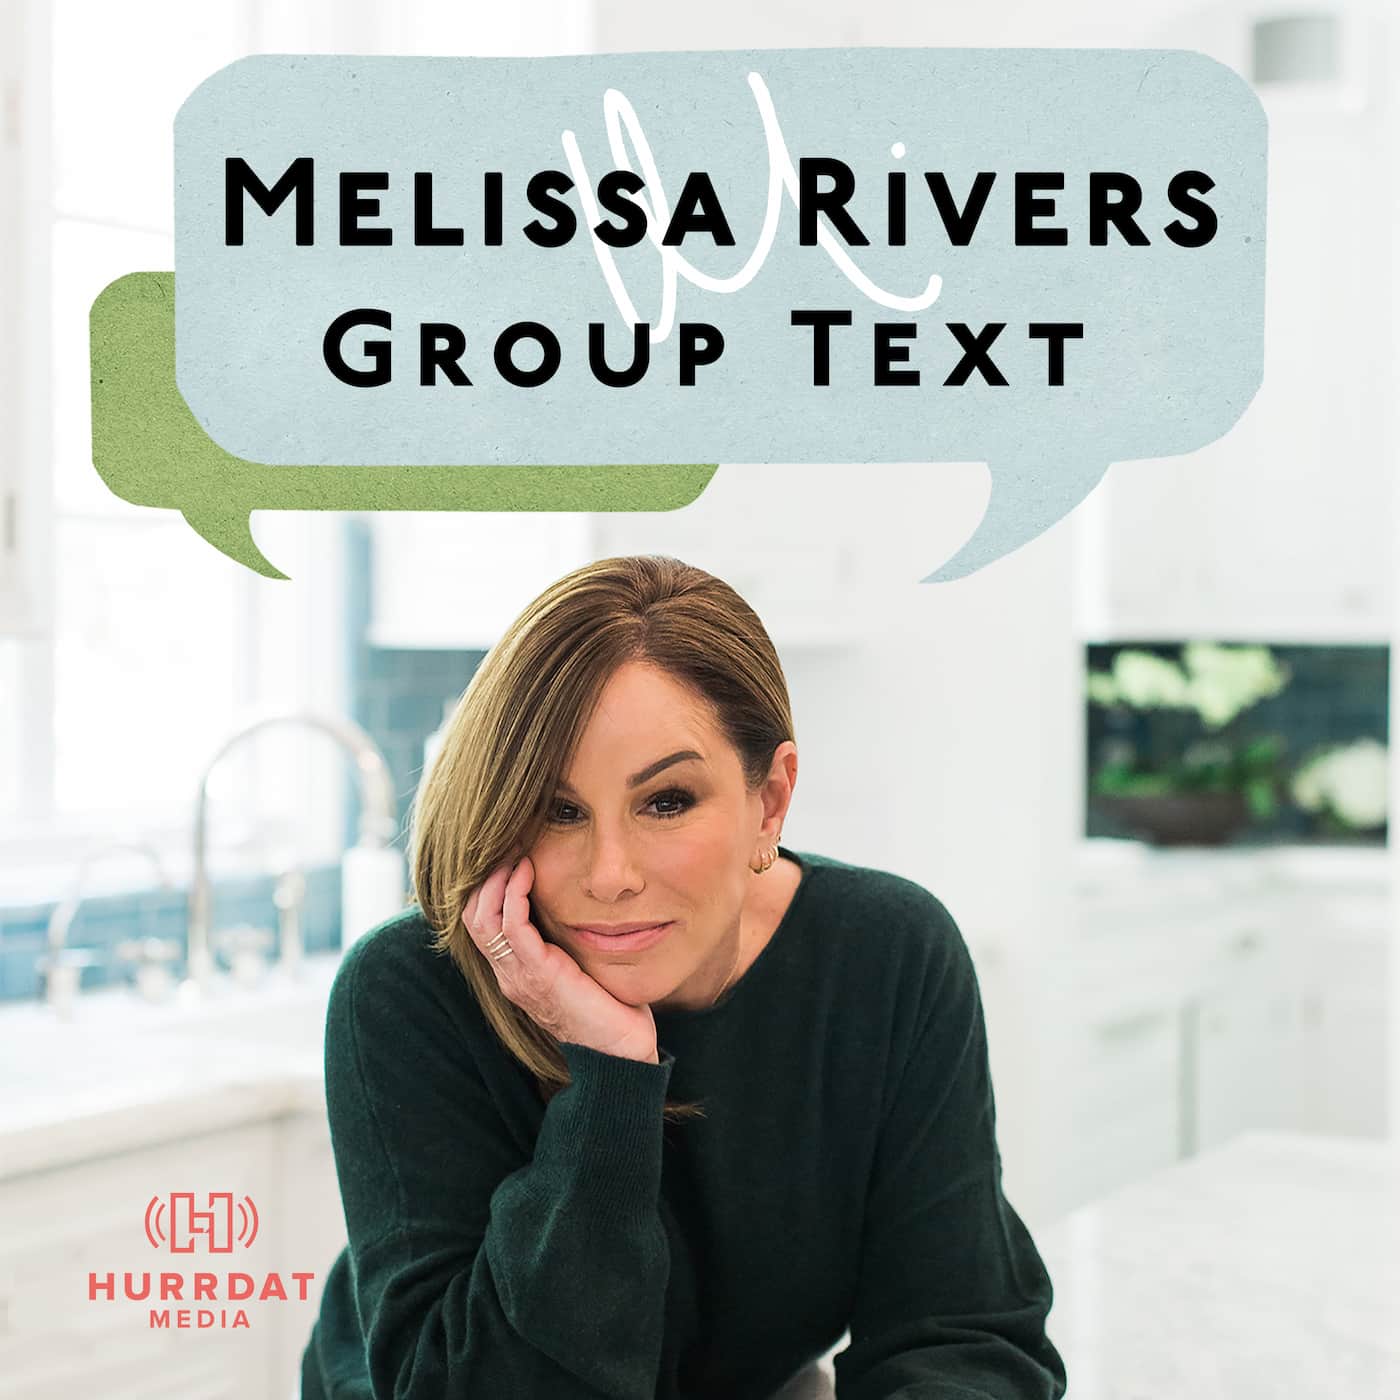 Melissa Rivers' Group Text